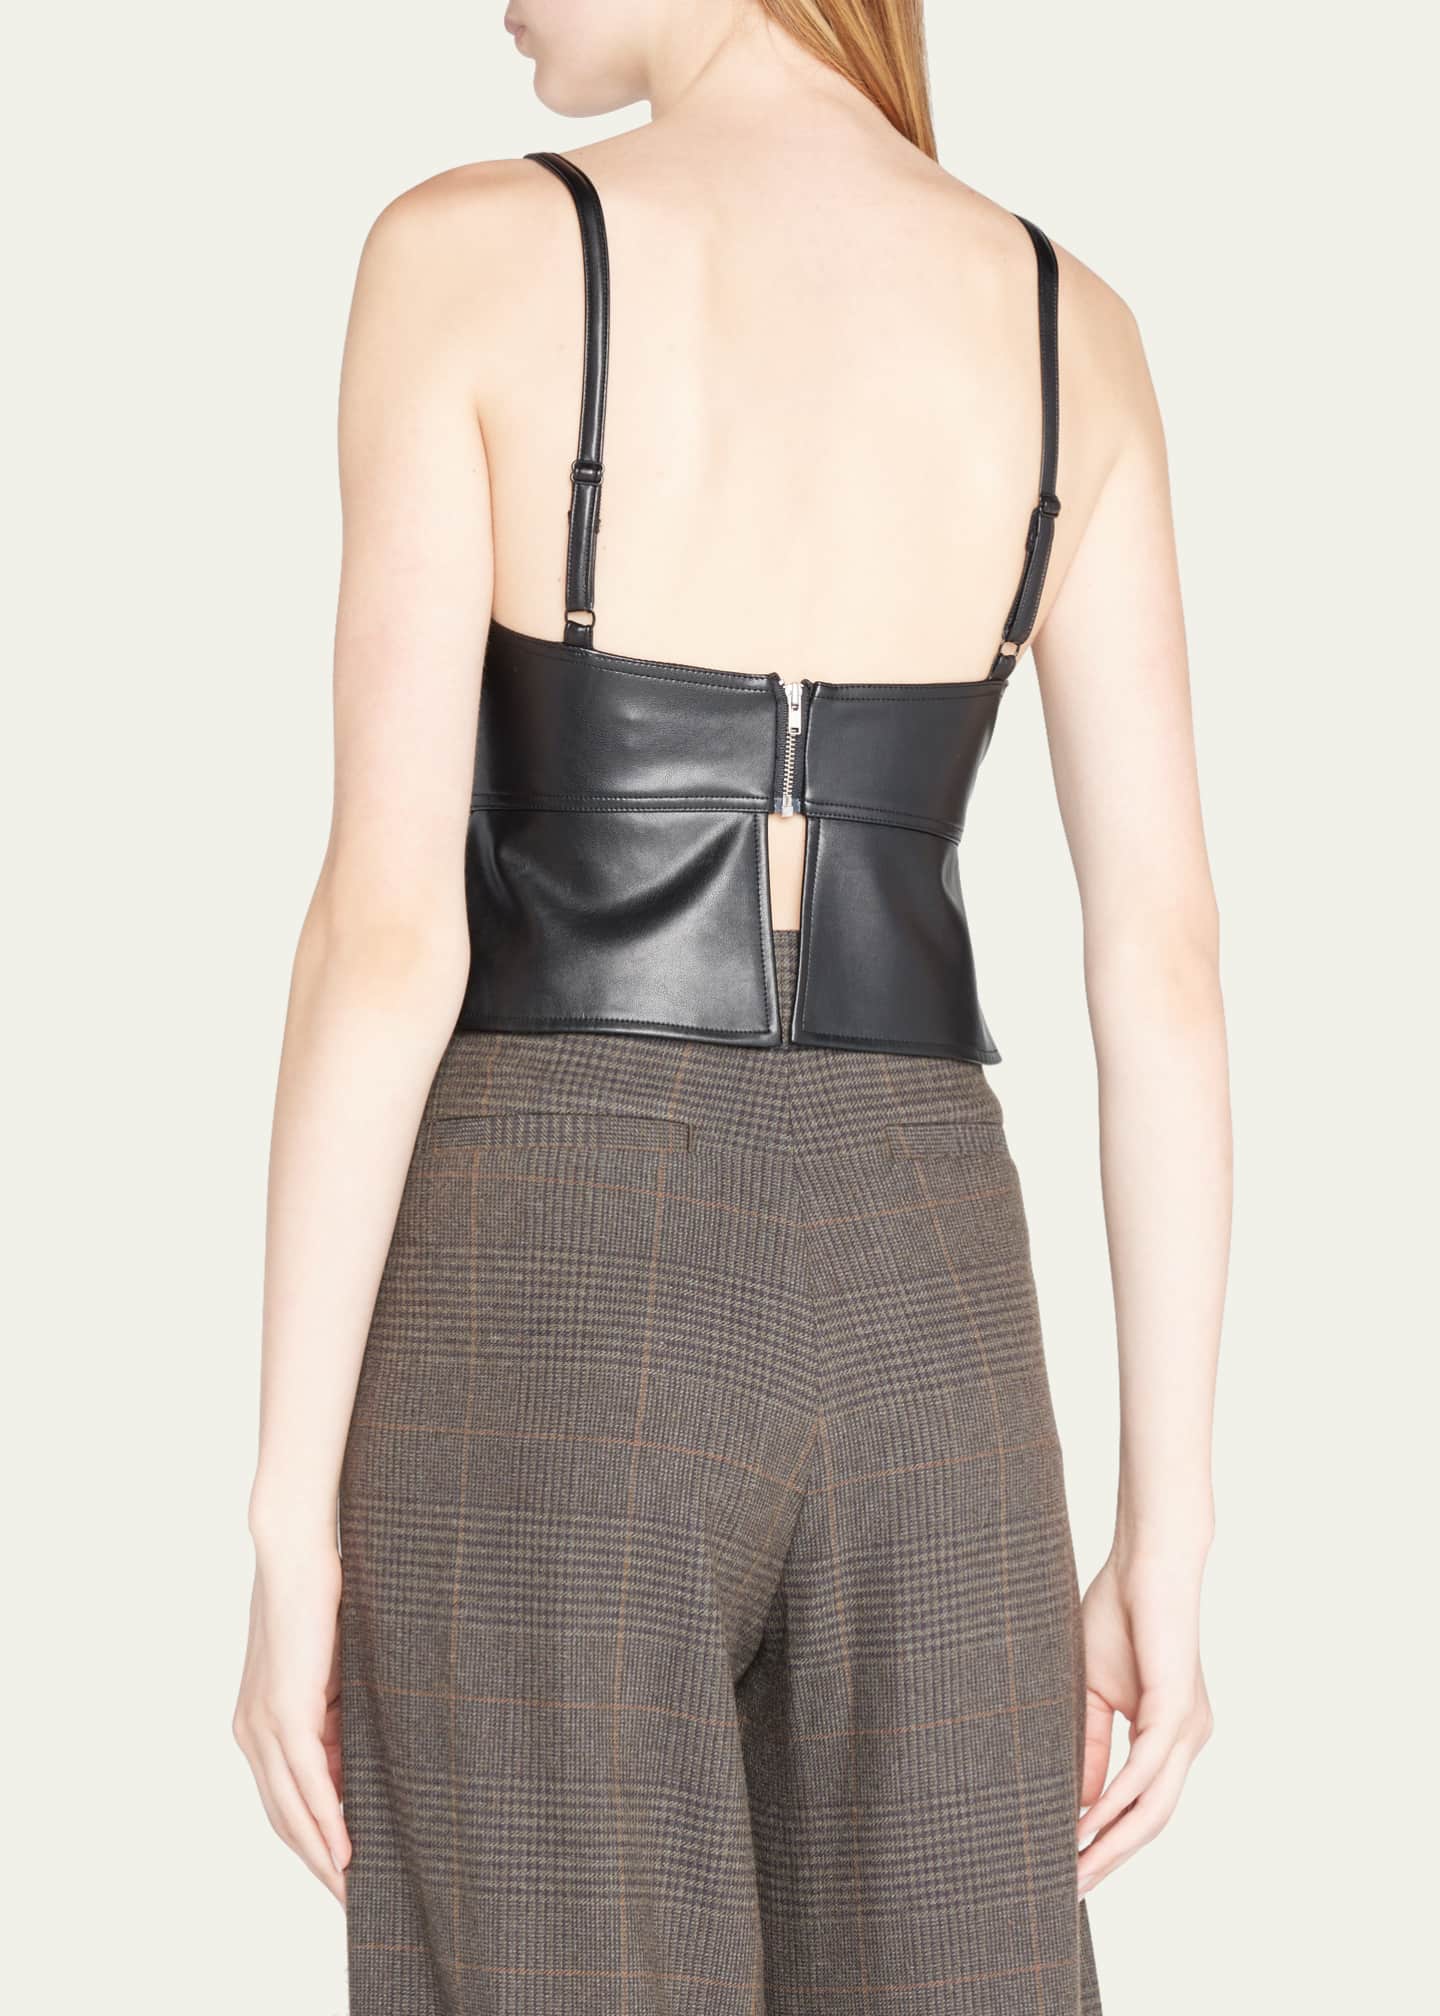 A.L.C. Gweneth Faux-Leather Bustier Top - Bergdorf Goodman